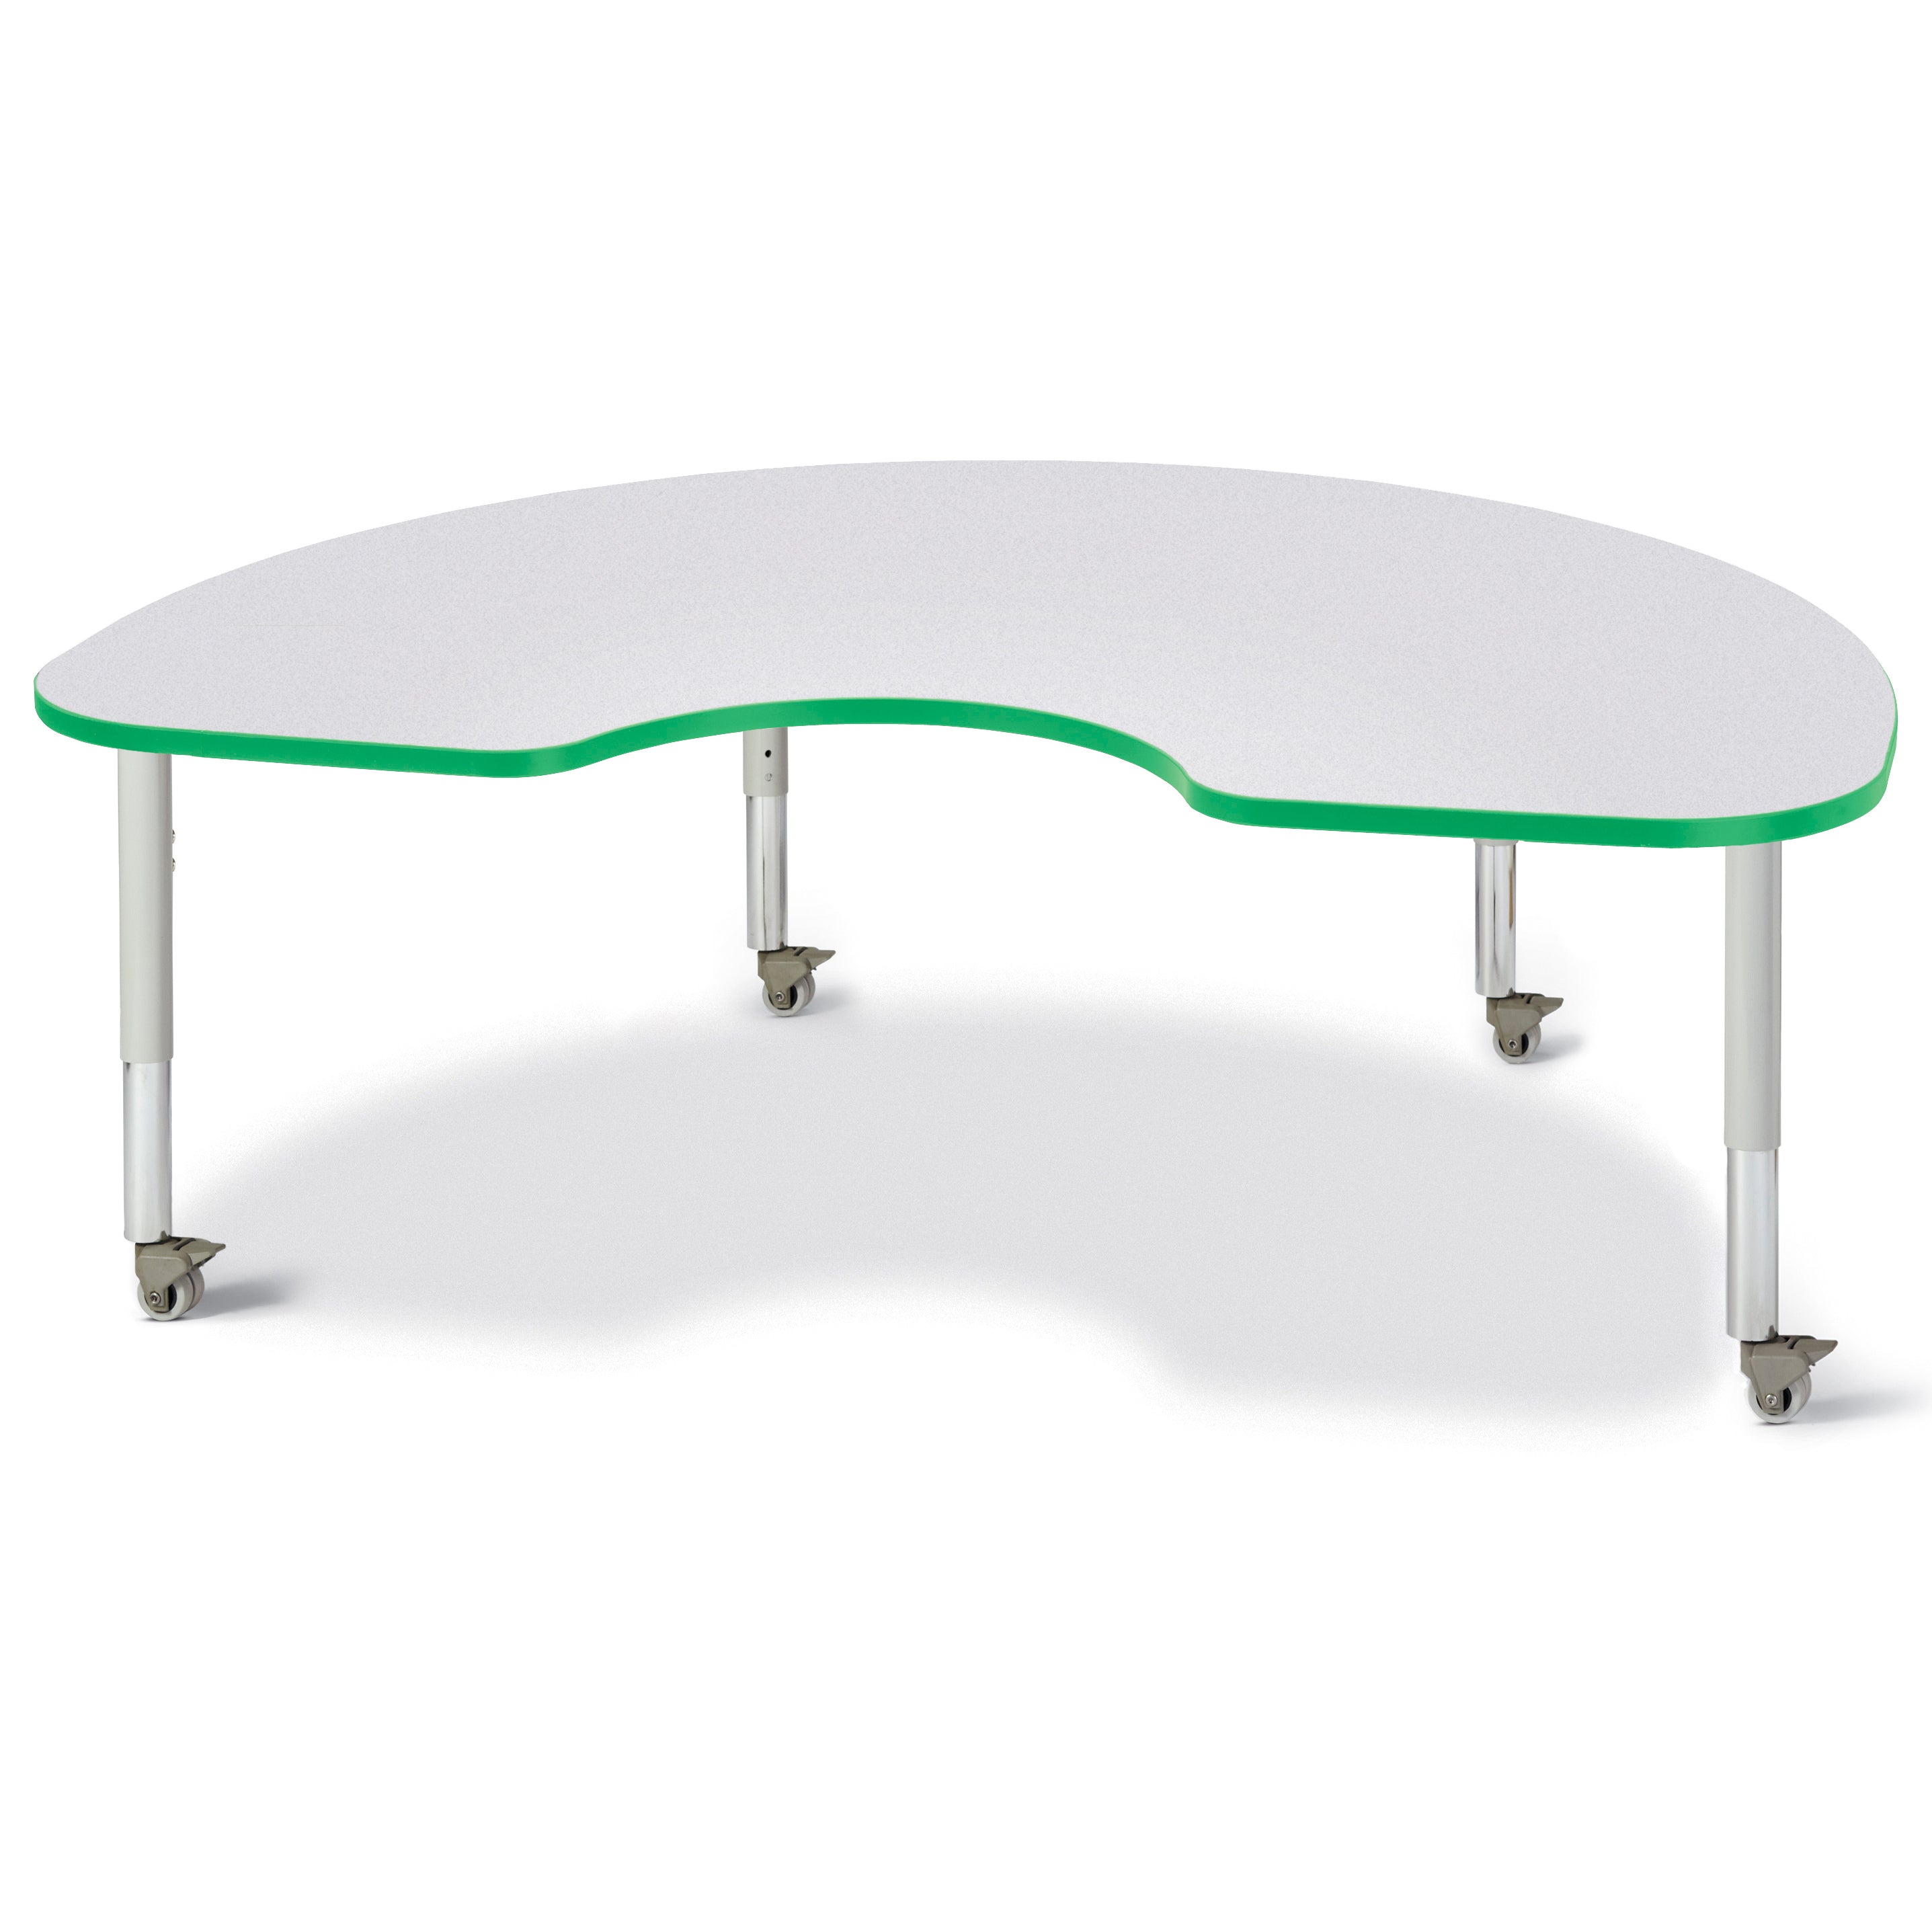 6423JCM119, Berries Kidney Activity Table - 48" X 72", Mobile - Freckled Gray/Green/Gray